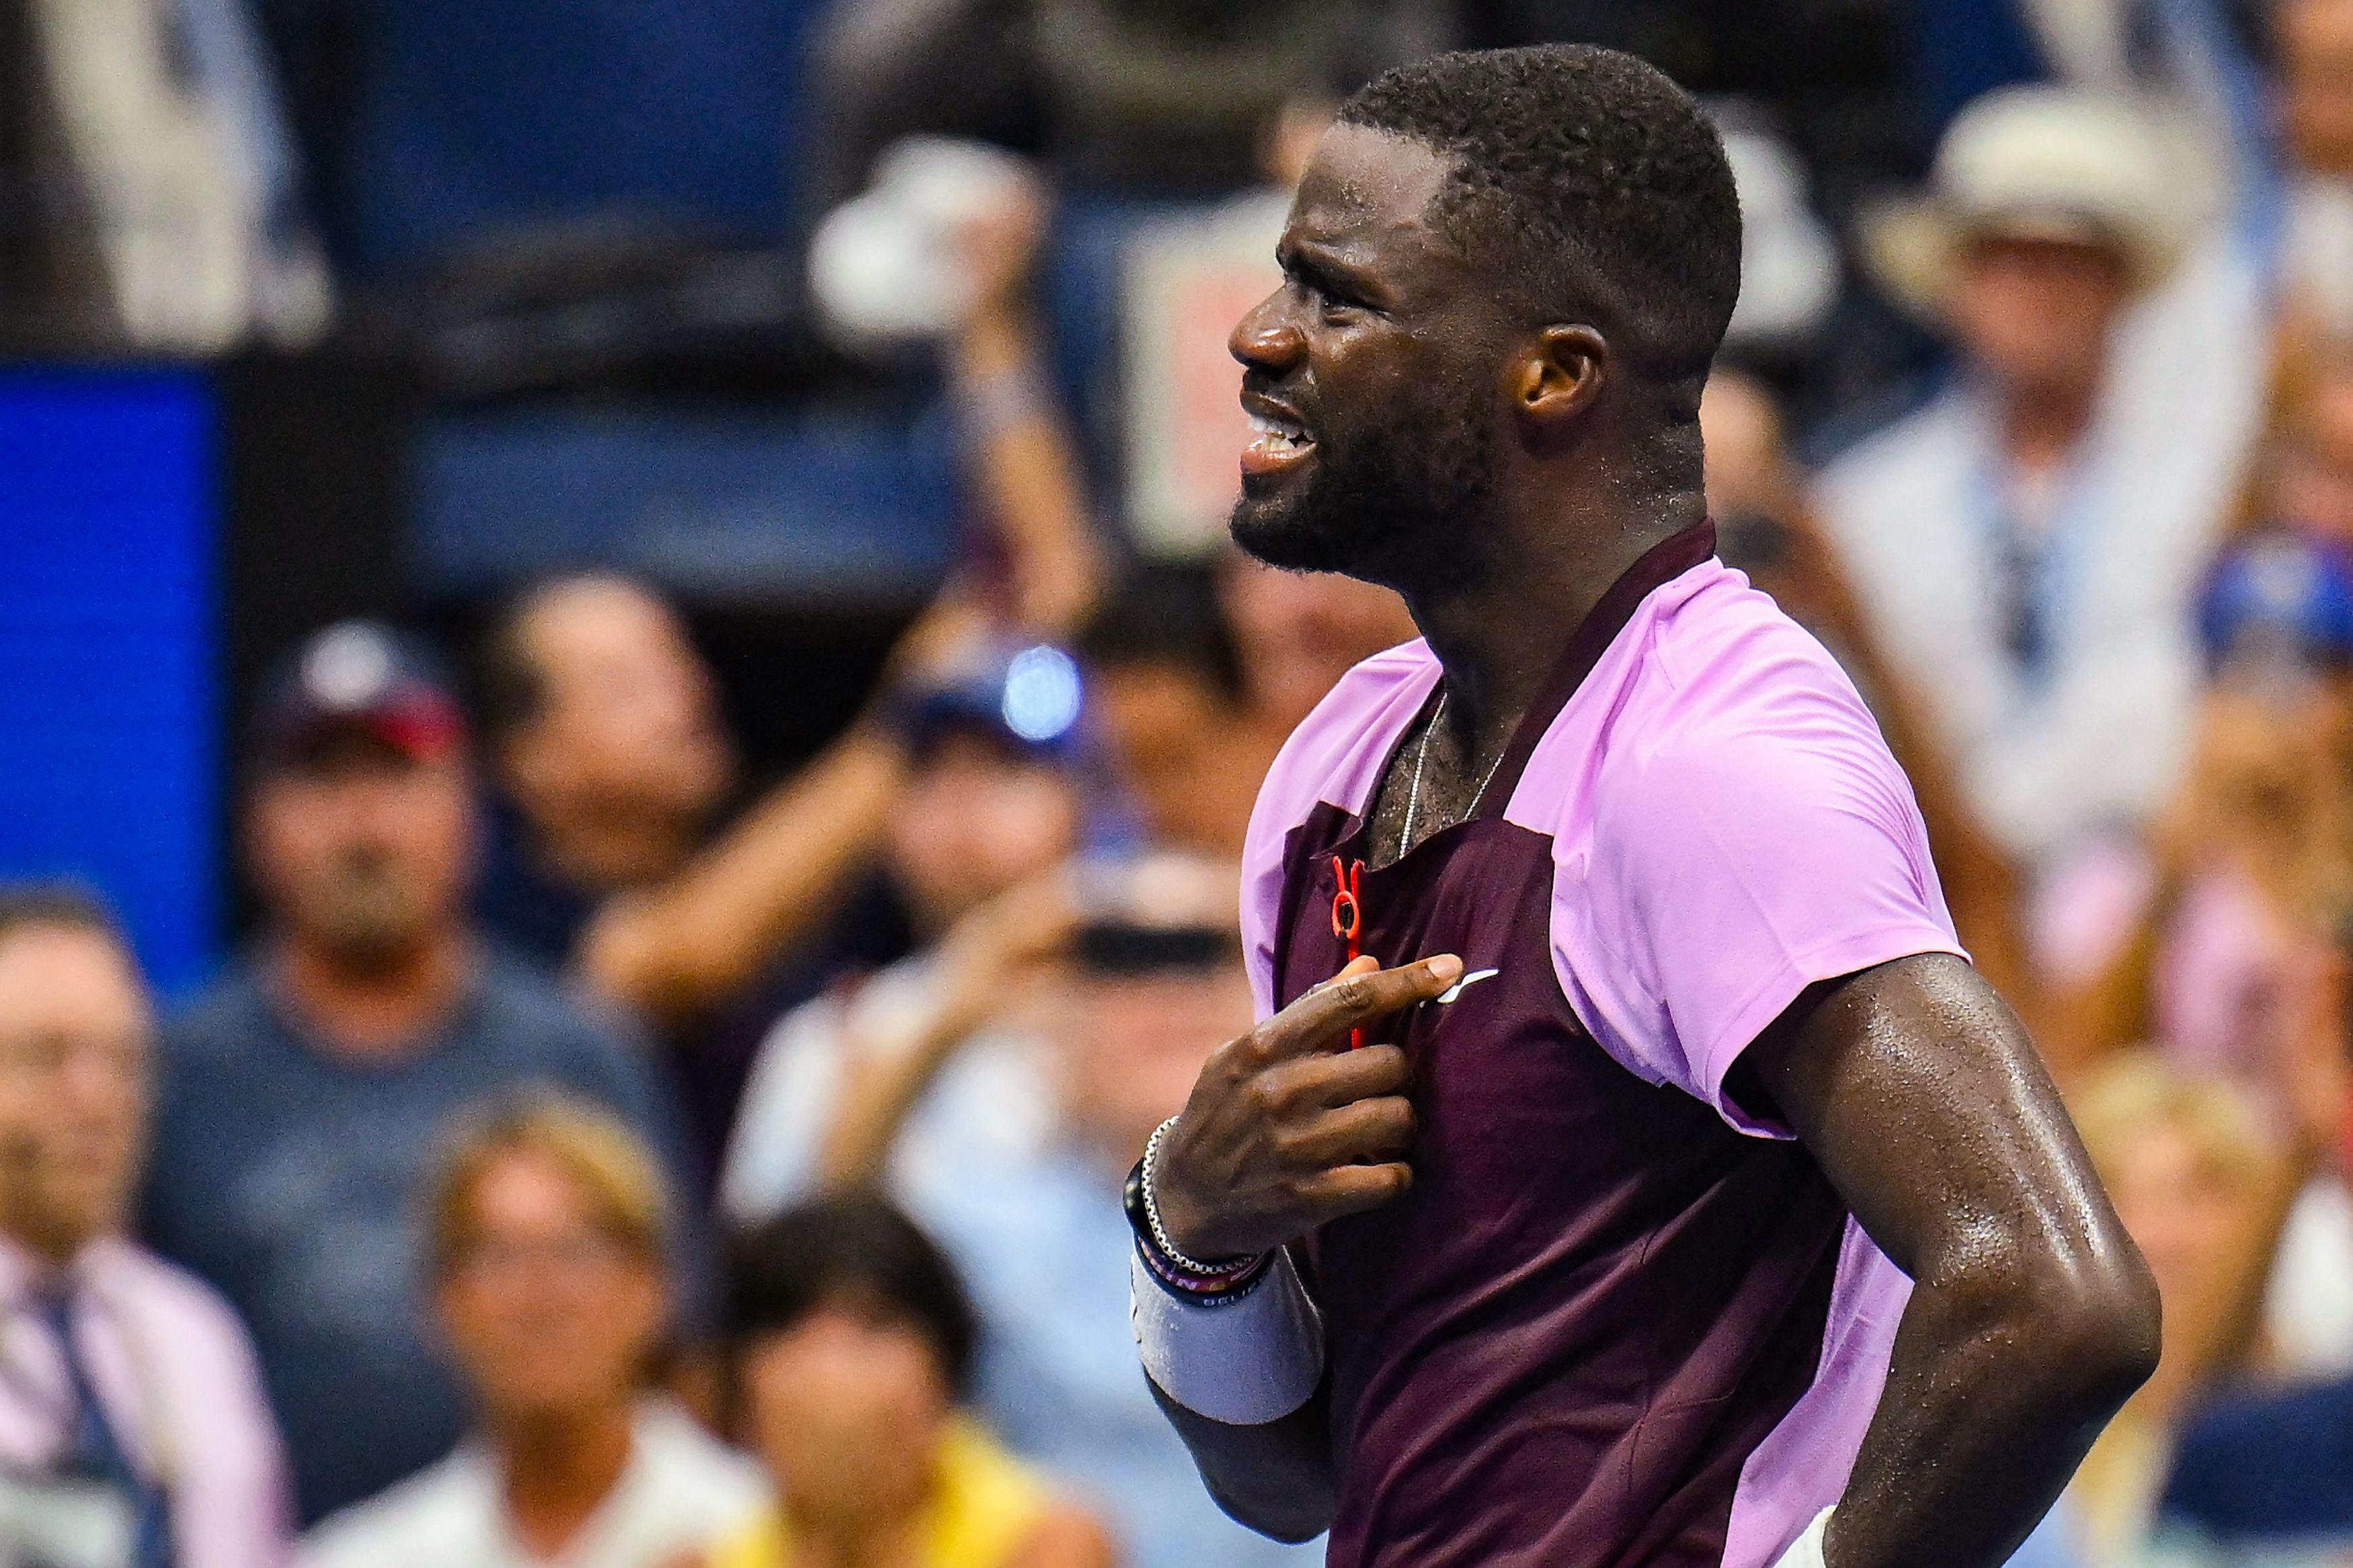 With his upset of Rafael Nadal, Frances Tiafoe comes of age at the US Open